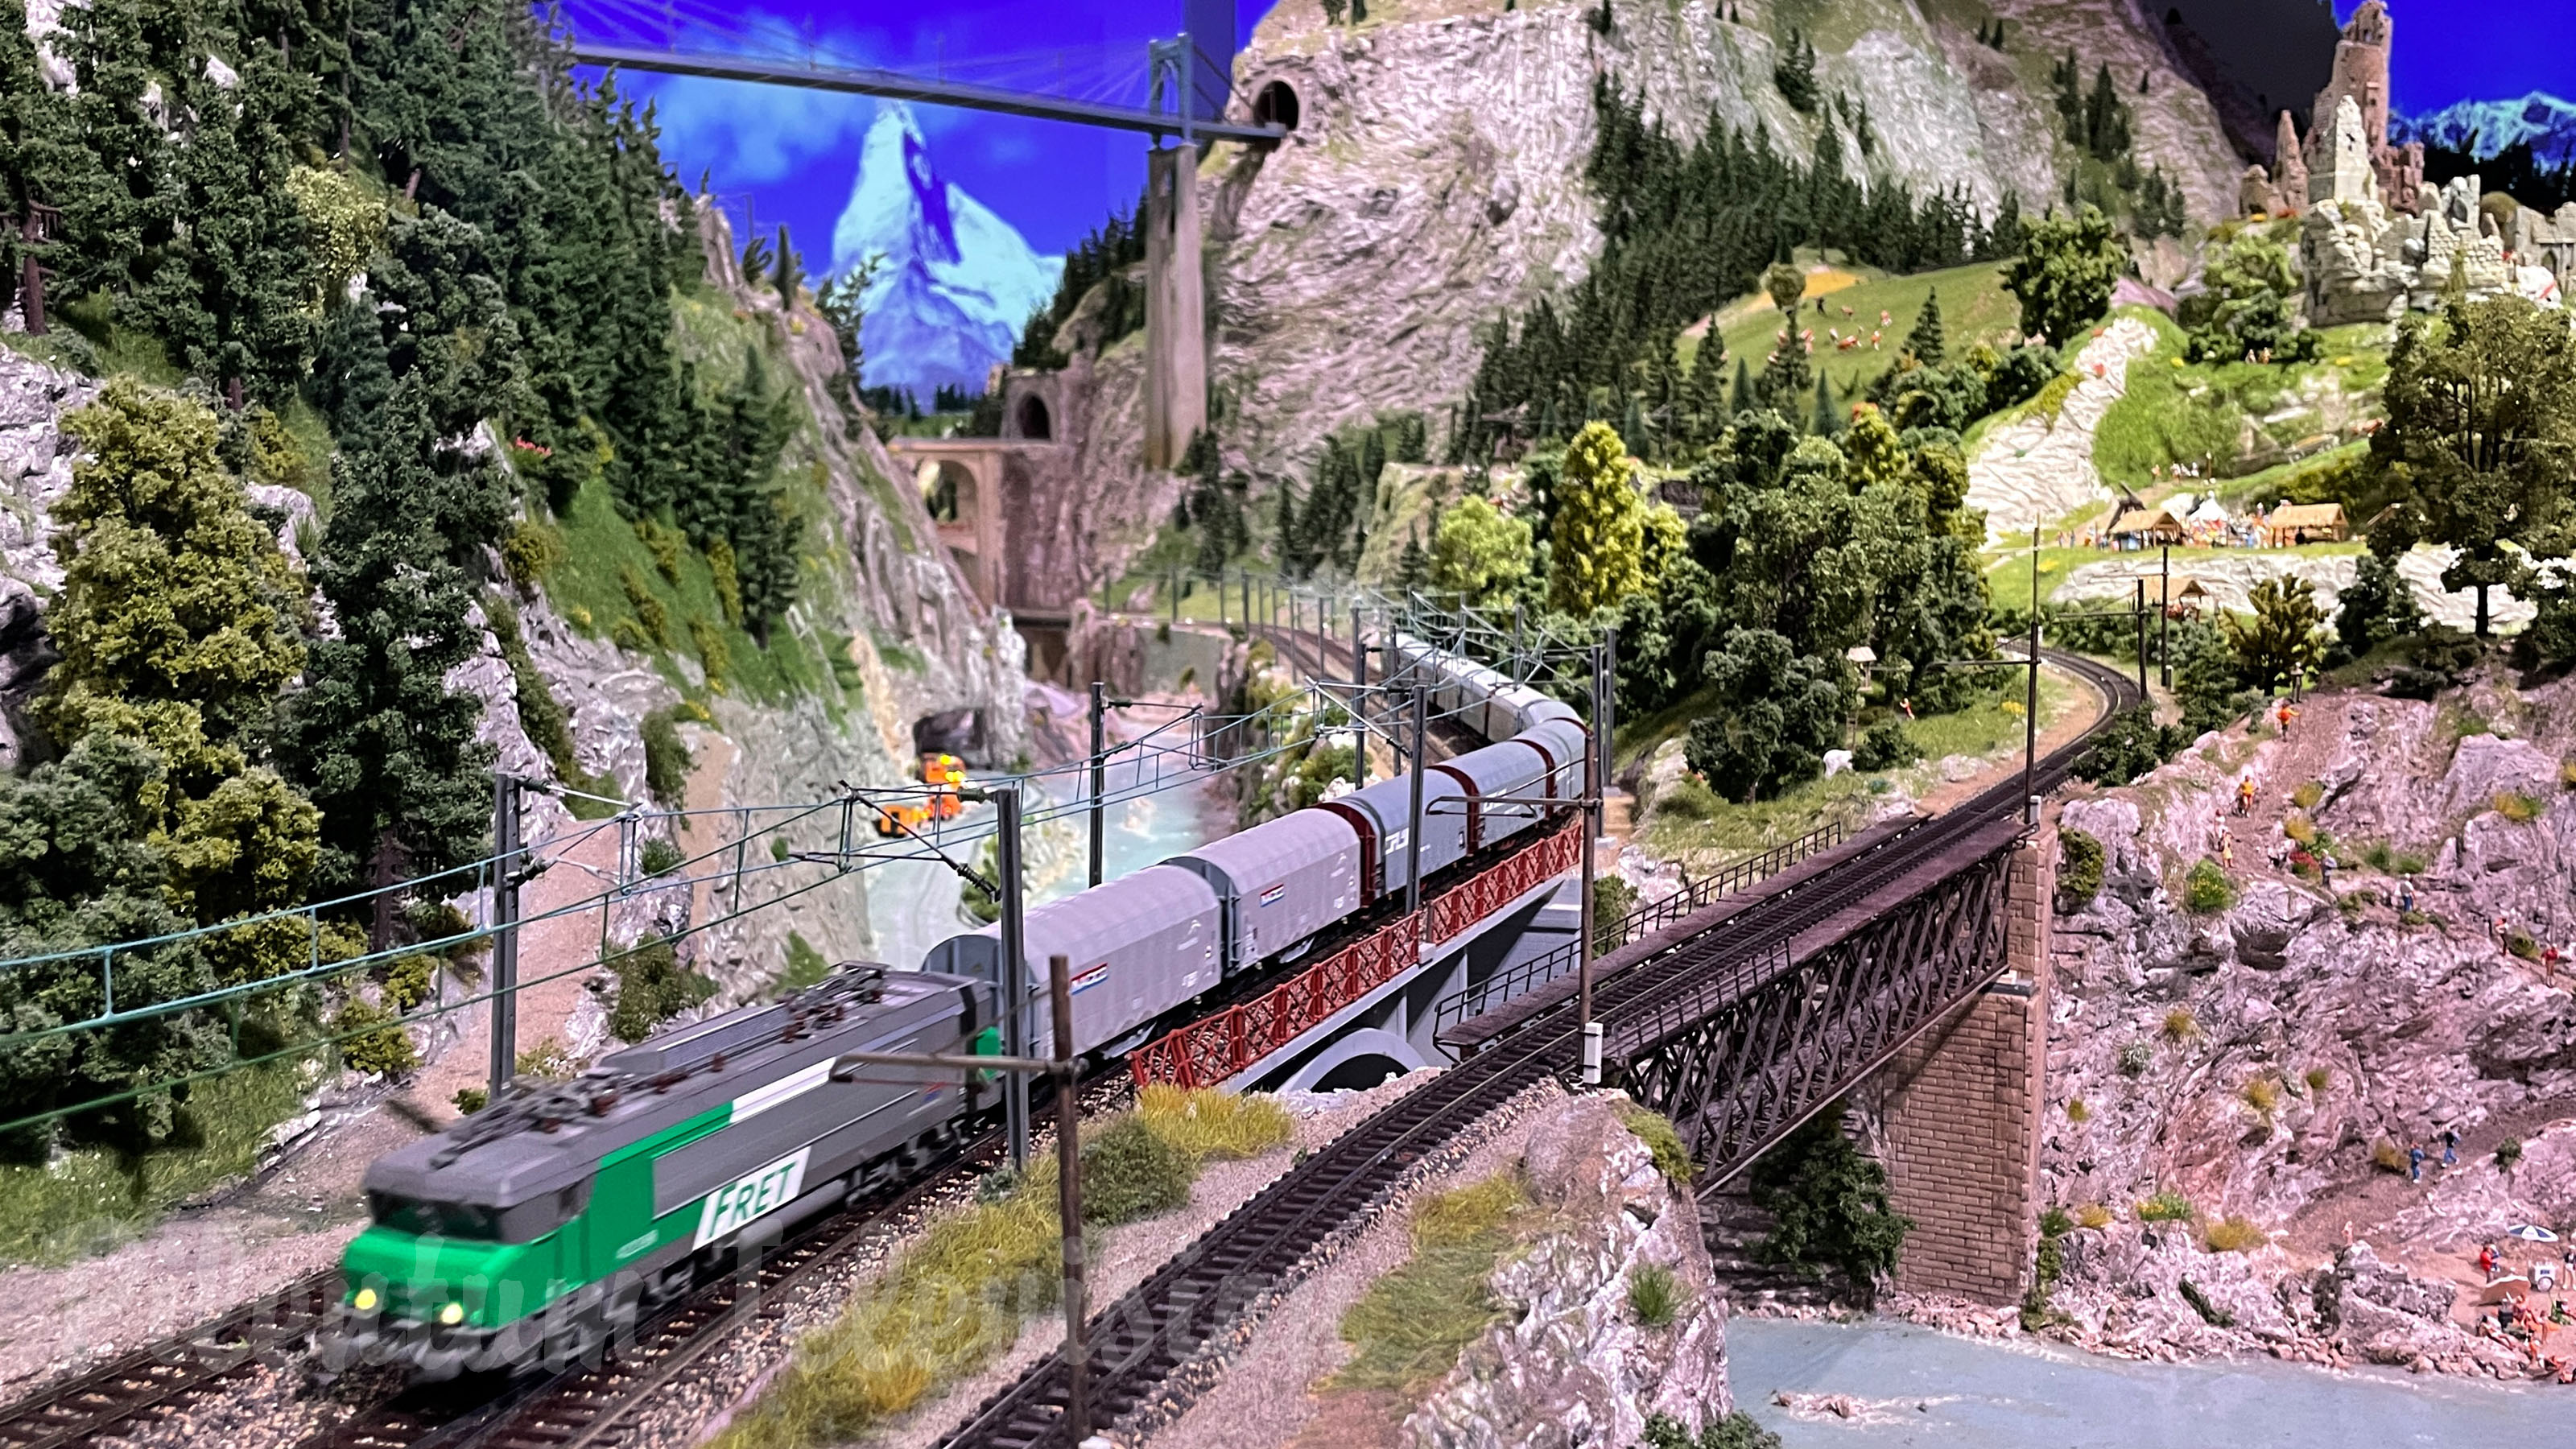 Mini World Lyon - The Largest Model Railway Layout in HO Scale of France - Model Train Cab Ride